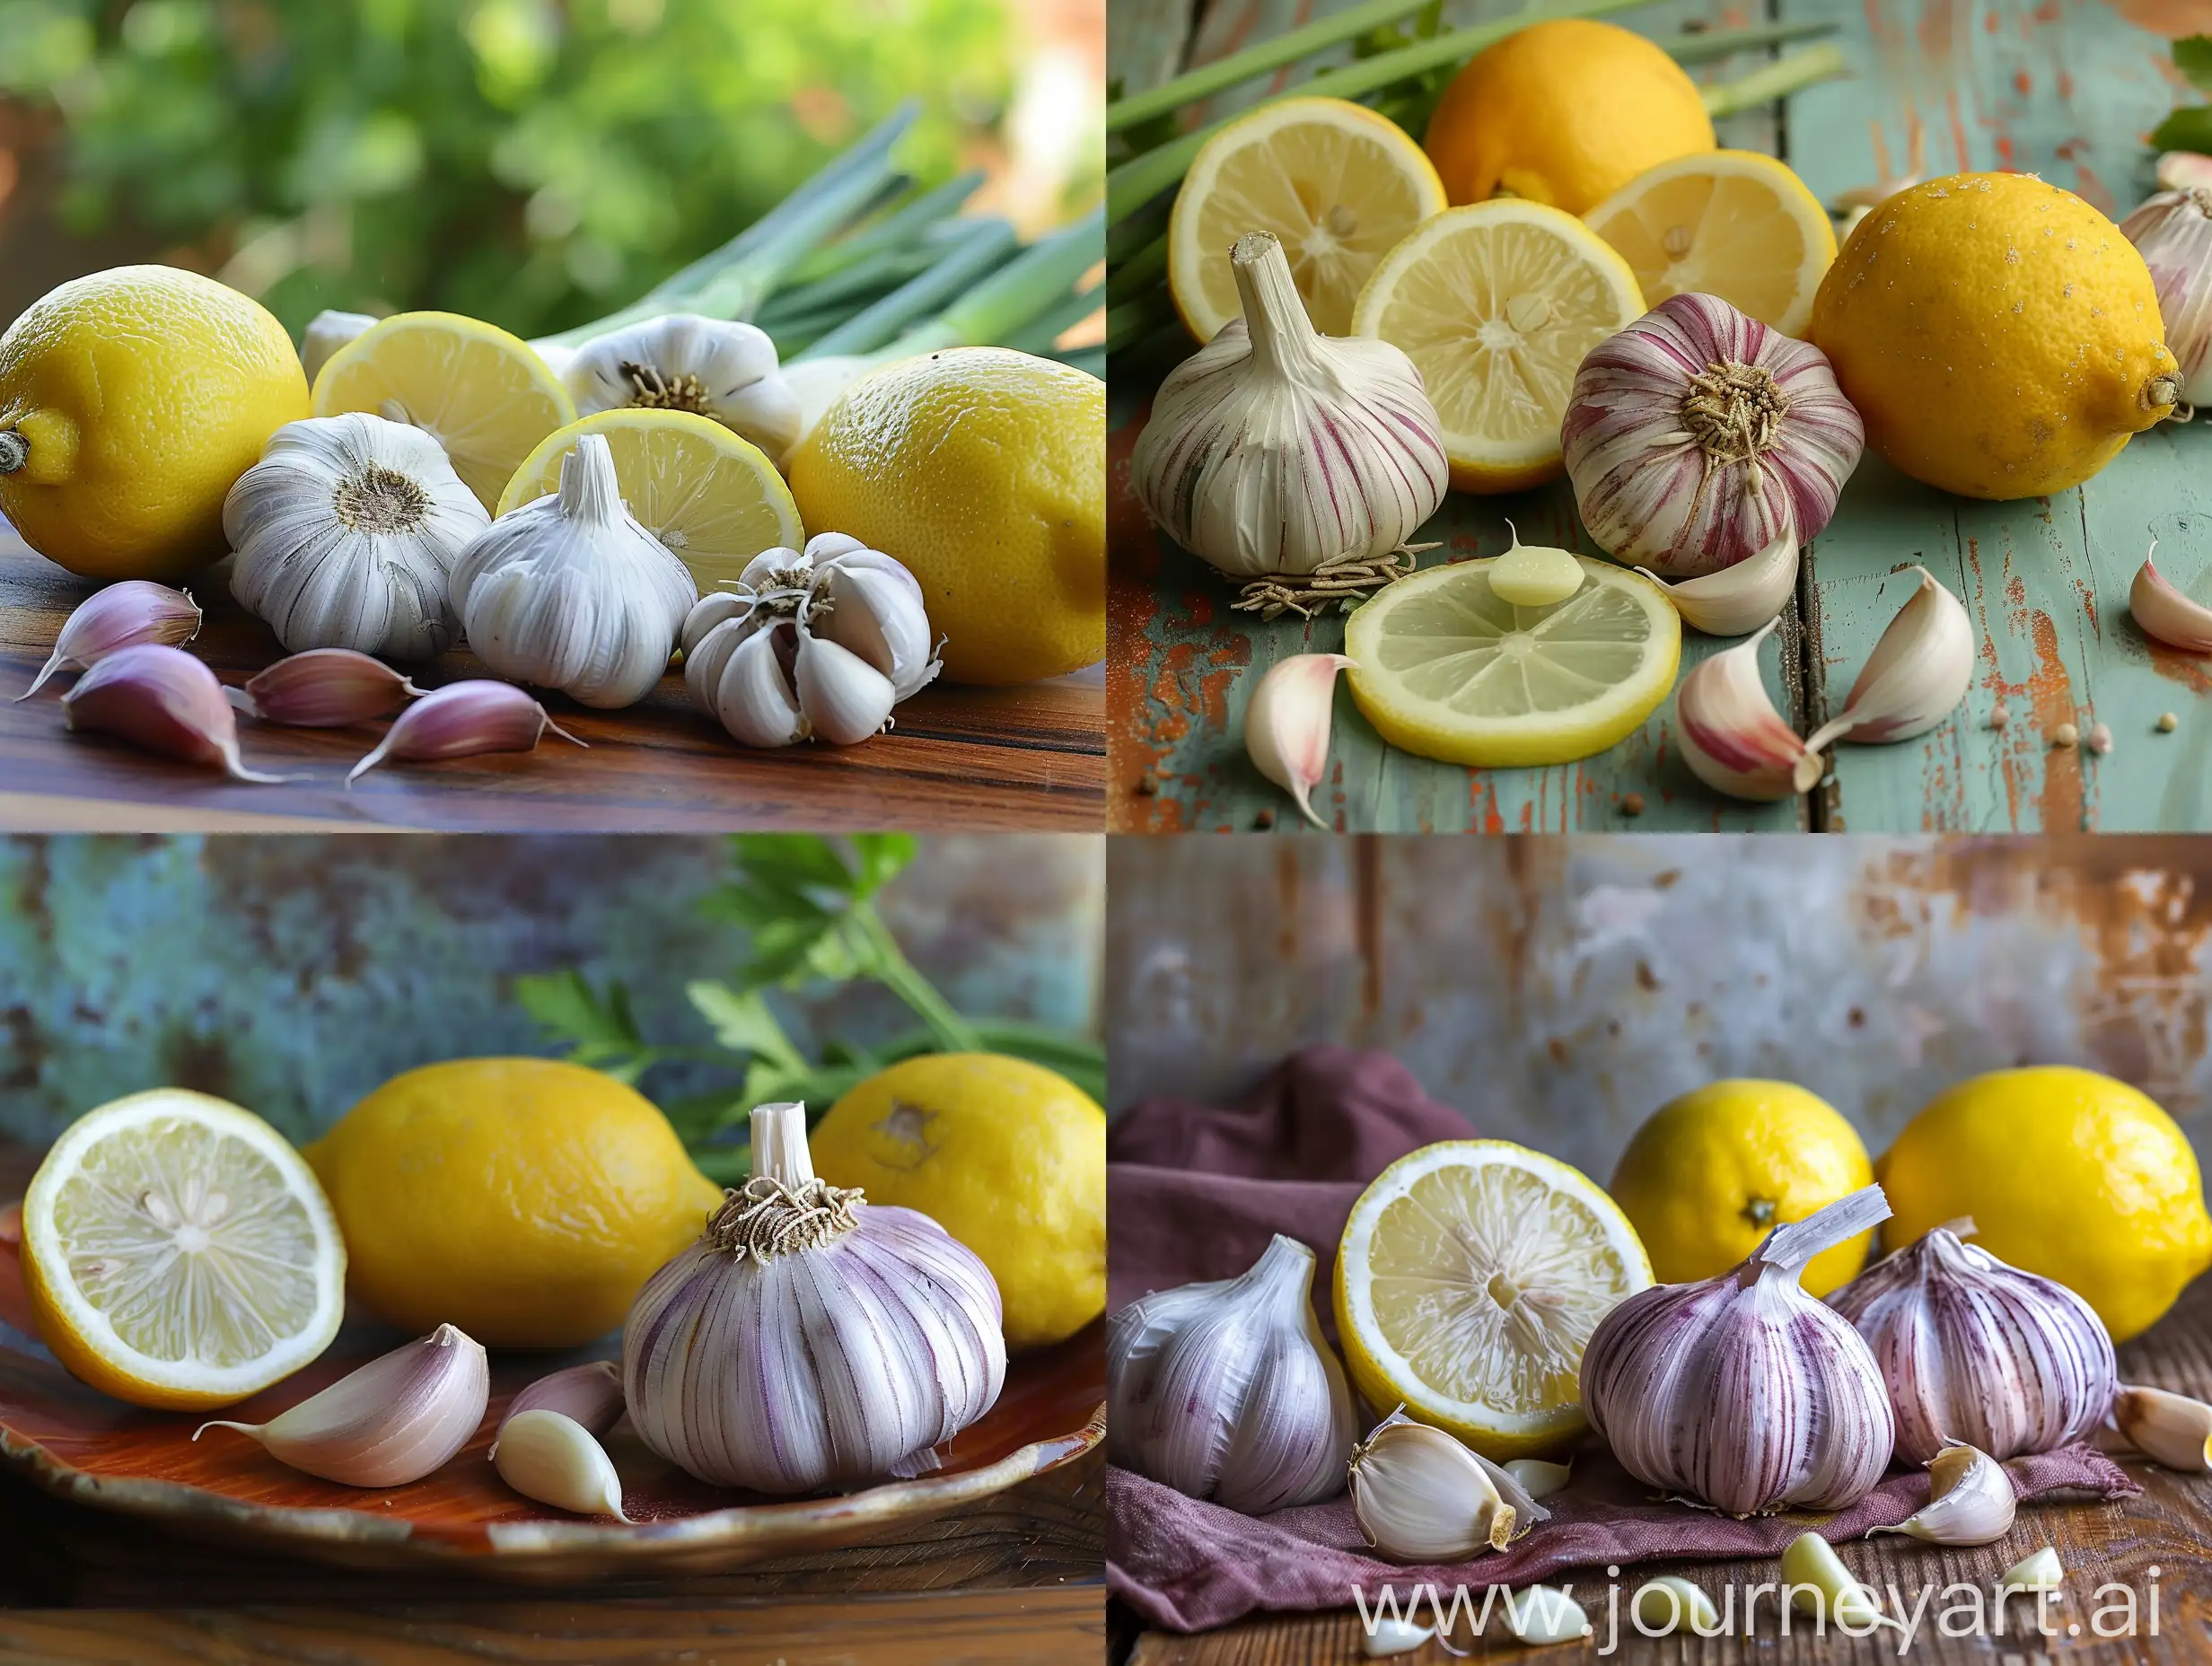 Attractive advertising photo of garlic and lemon with an attractive background